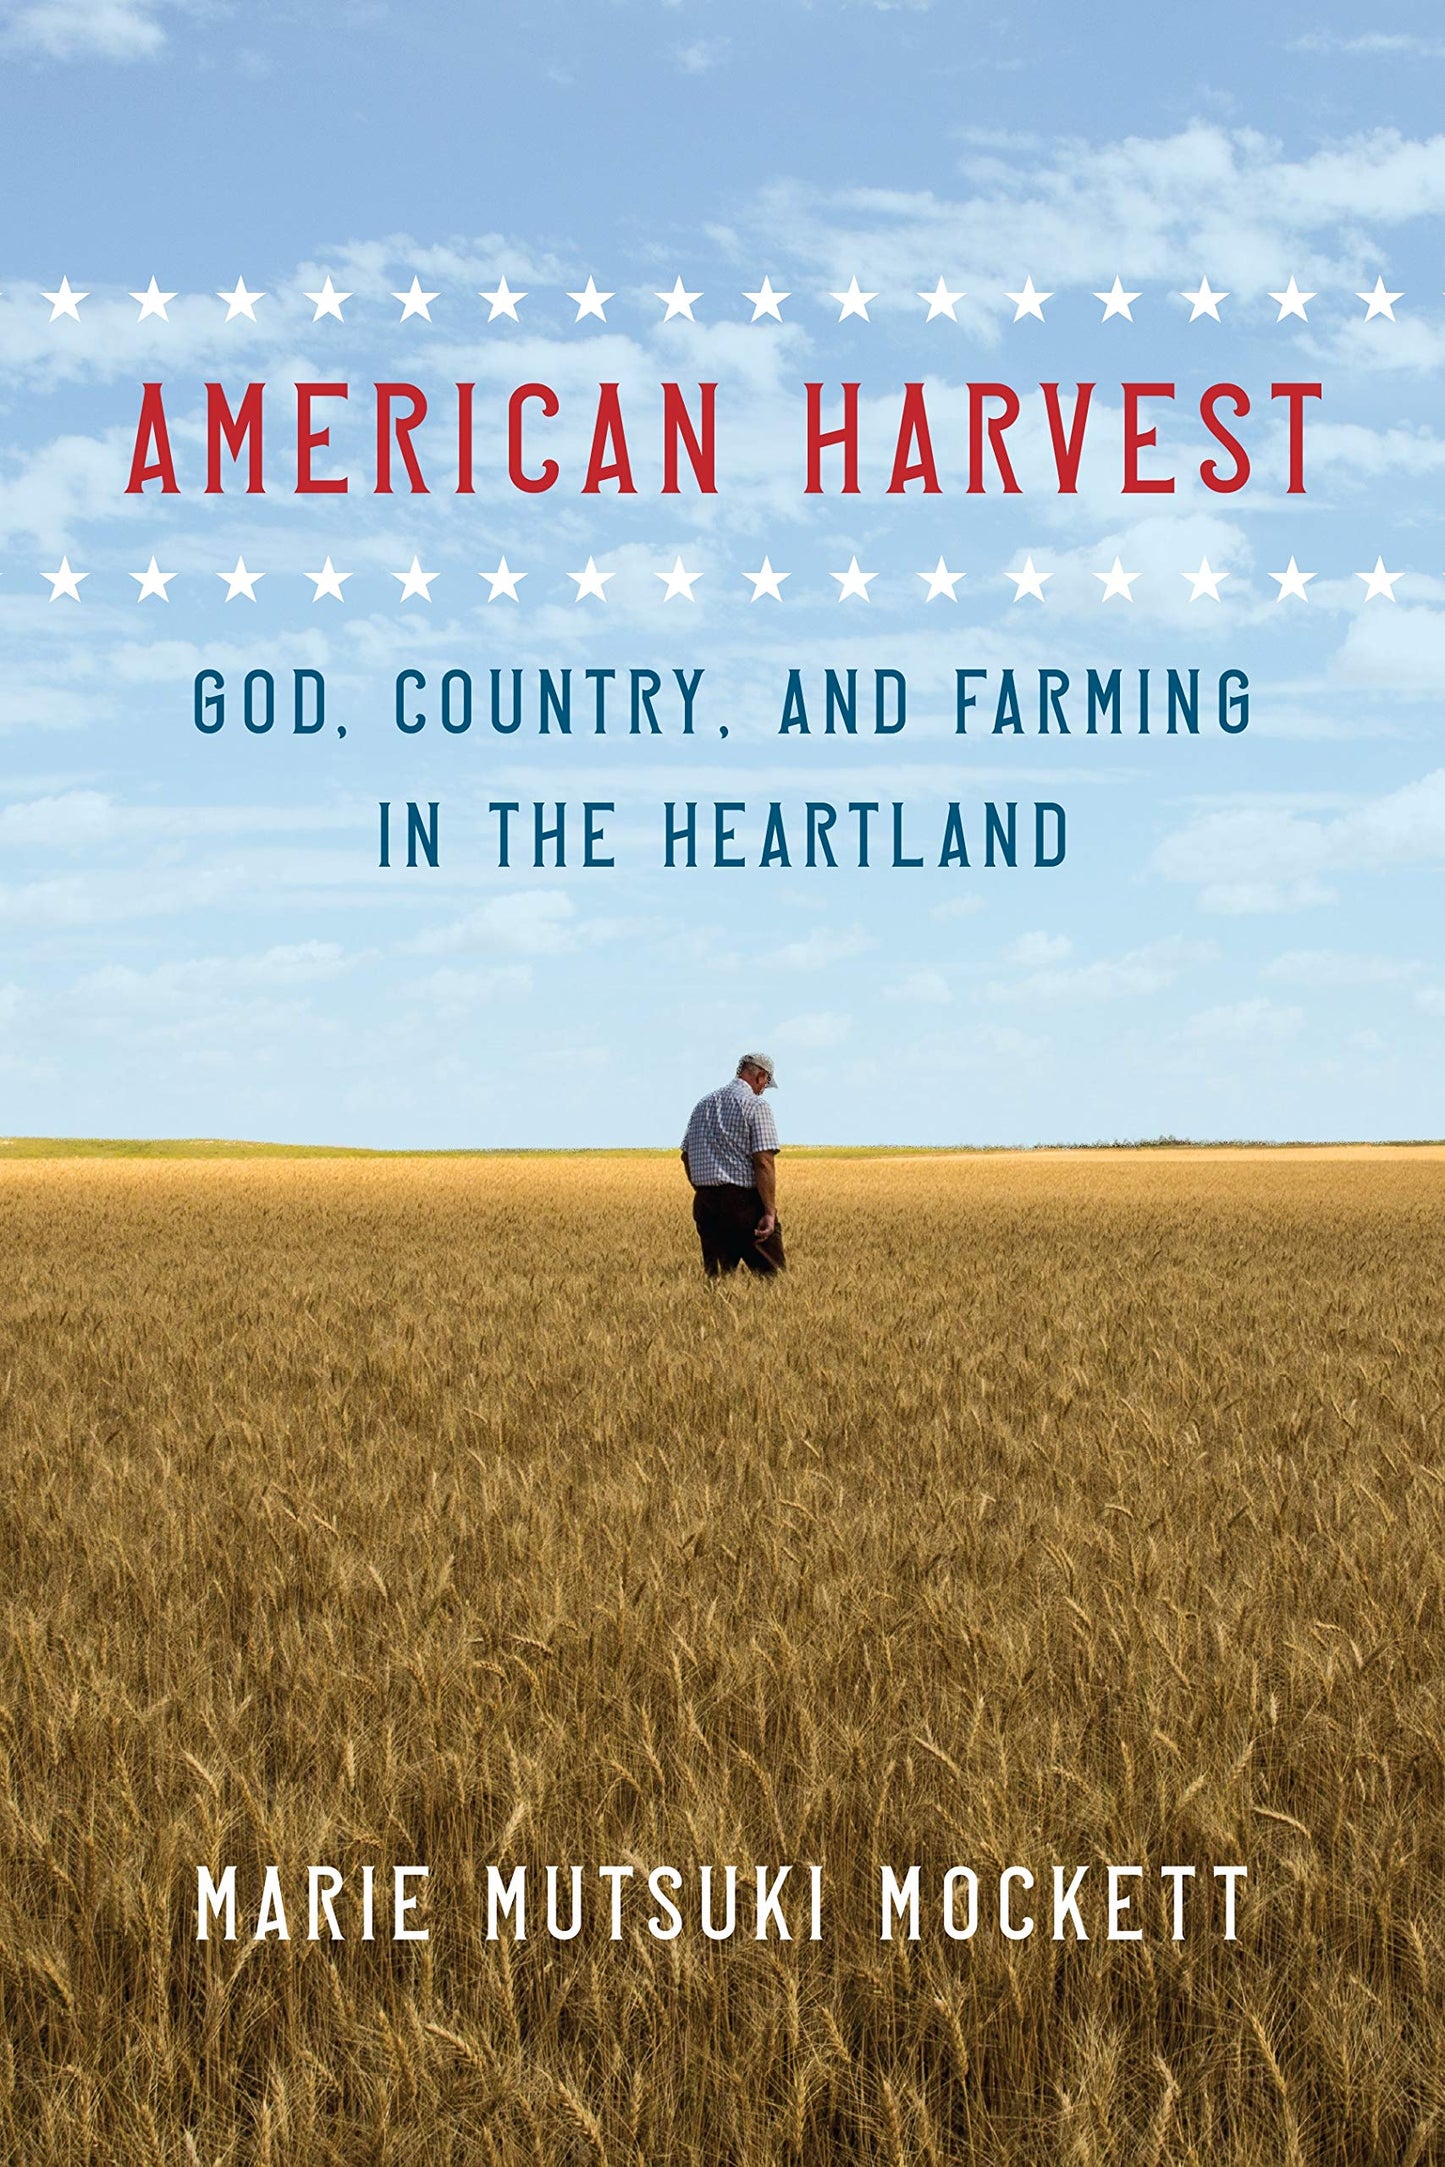 American Harvest: God, Country, and Farming in the Heartland ***